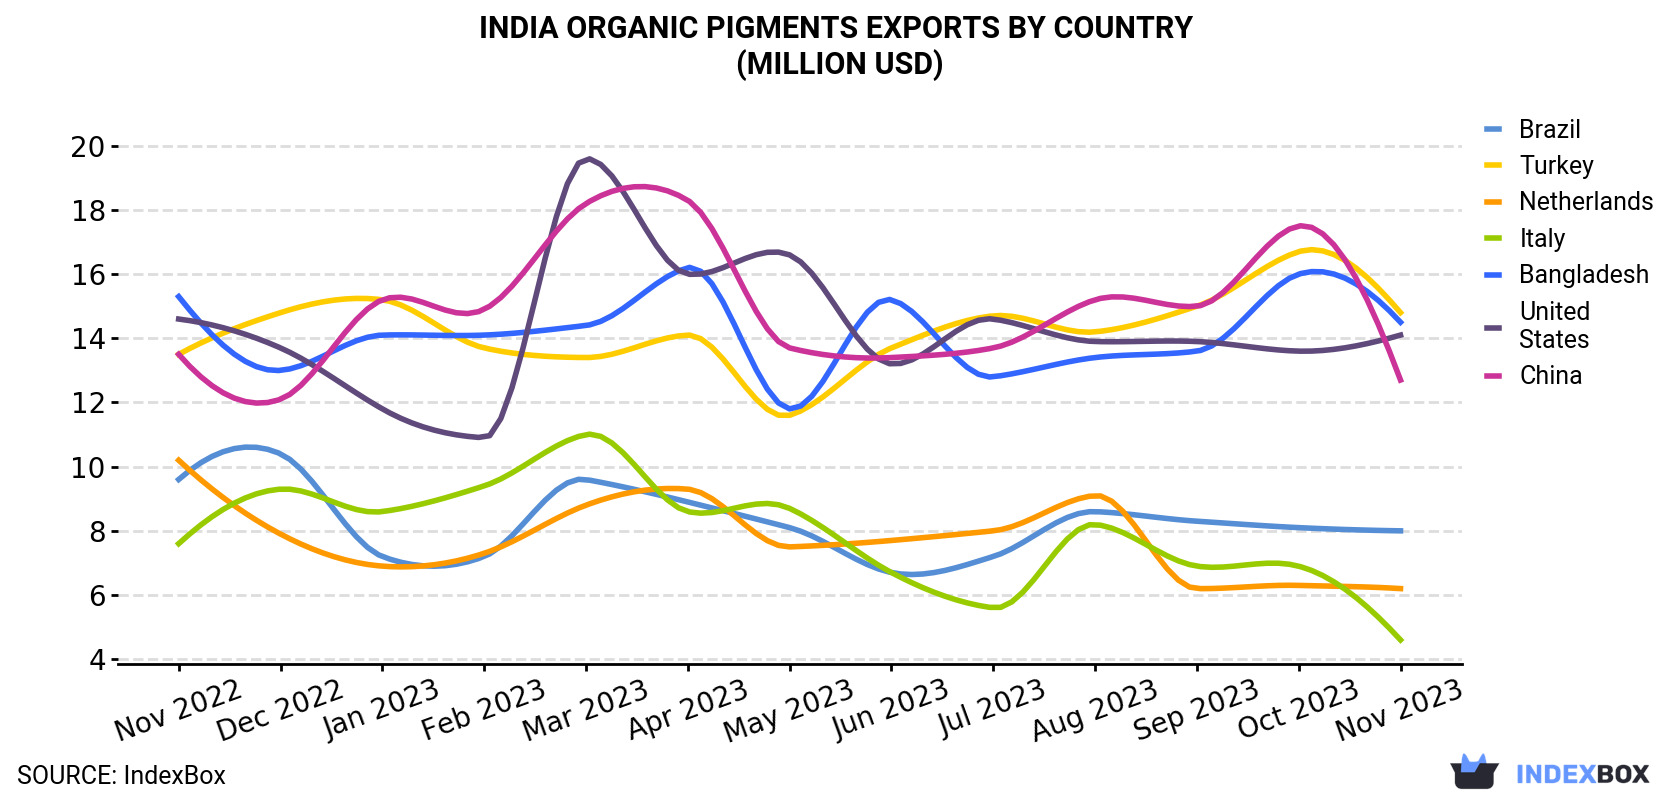 India Organic Pigments Exports By Country (Million USD)